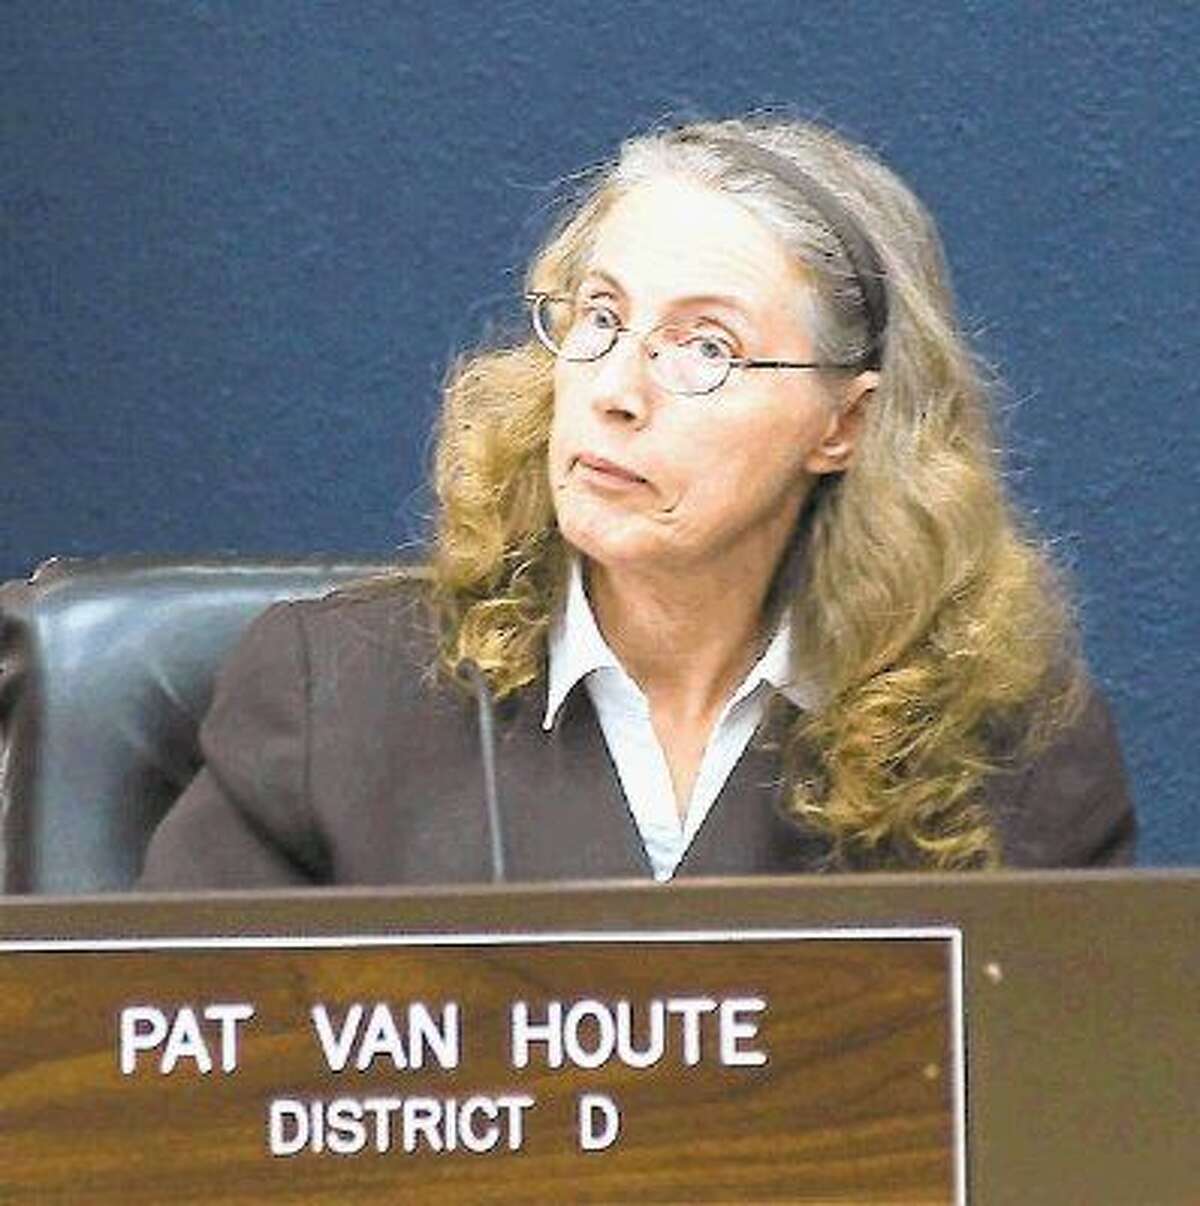 Pasadena Councilwoma Pat Van Houte, who is running for mayor, said she would drop the city's appeal of a judge's ruling in a voting rights case if she wins.